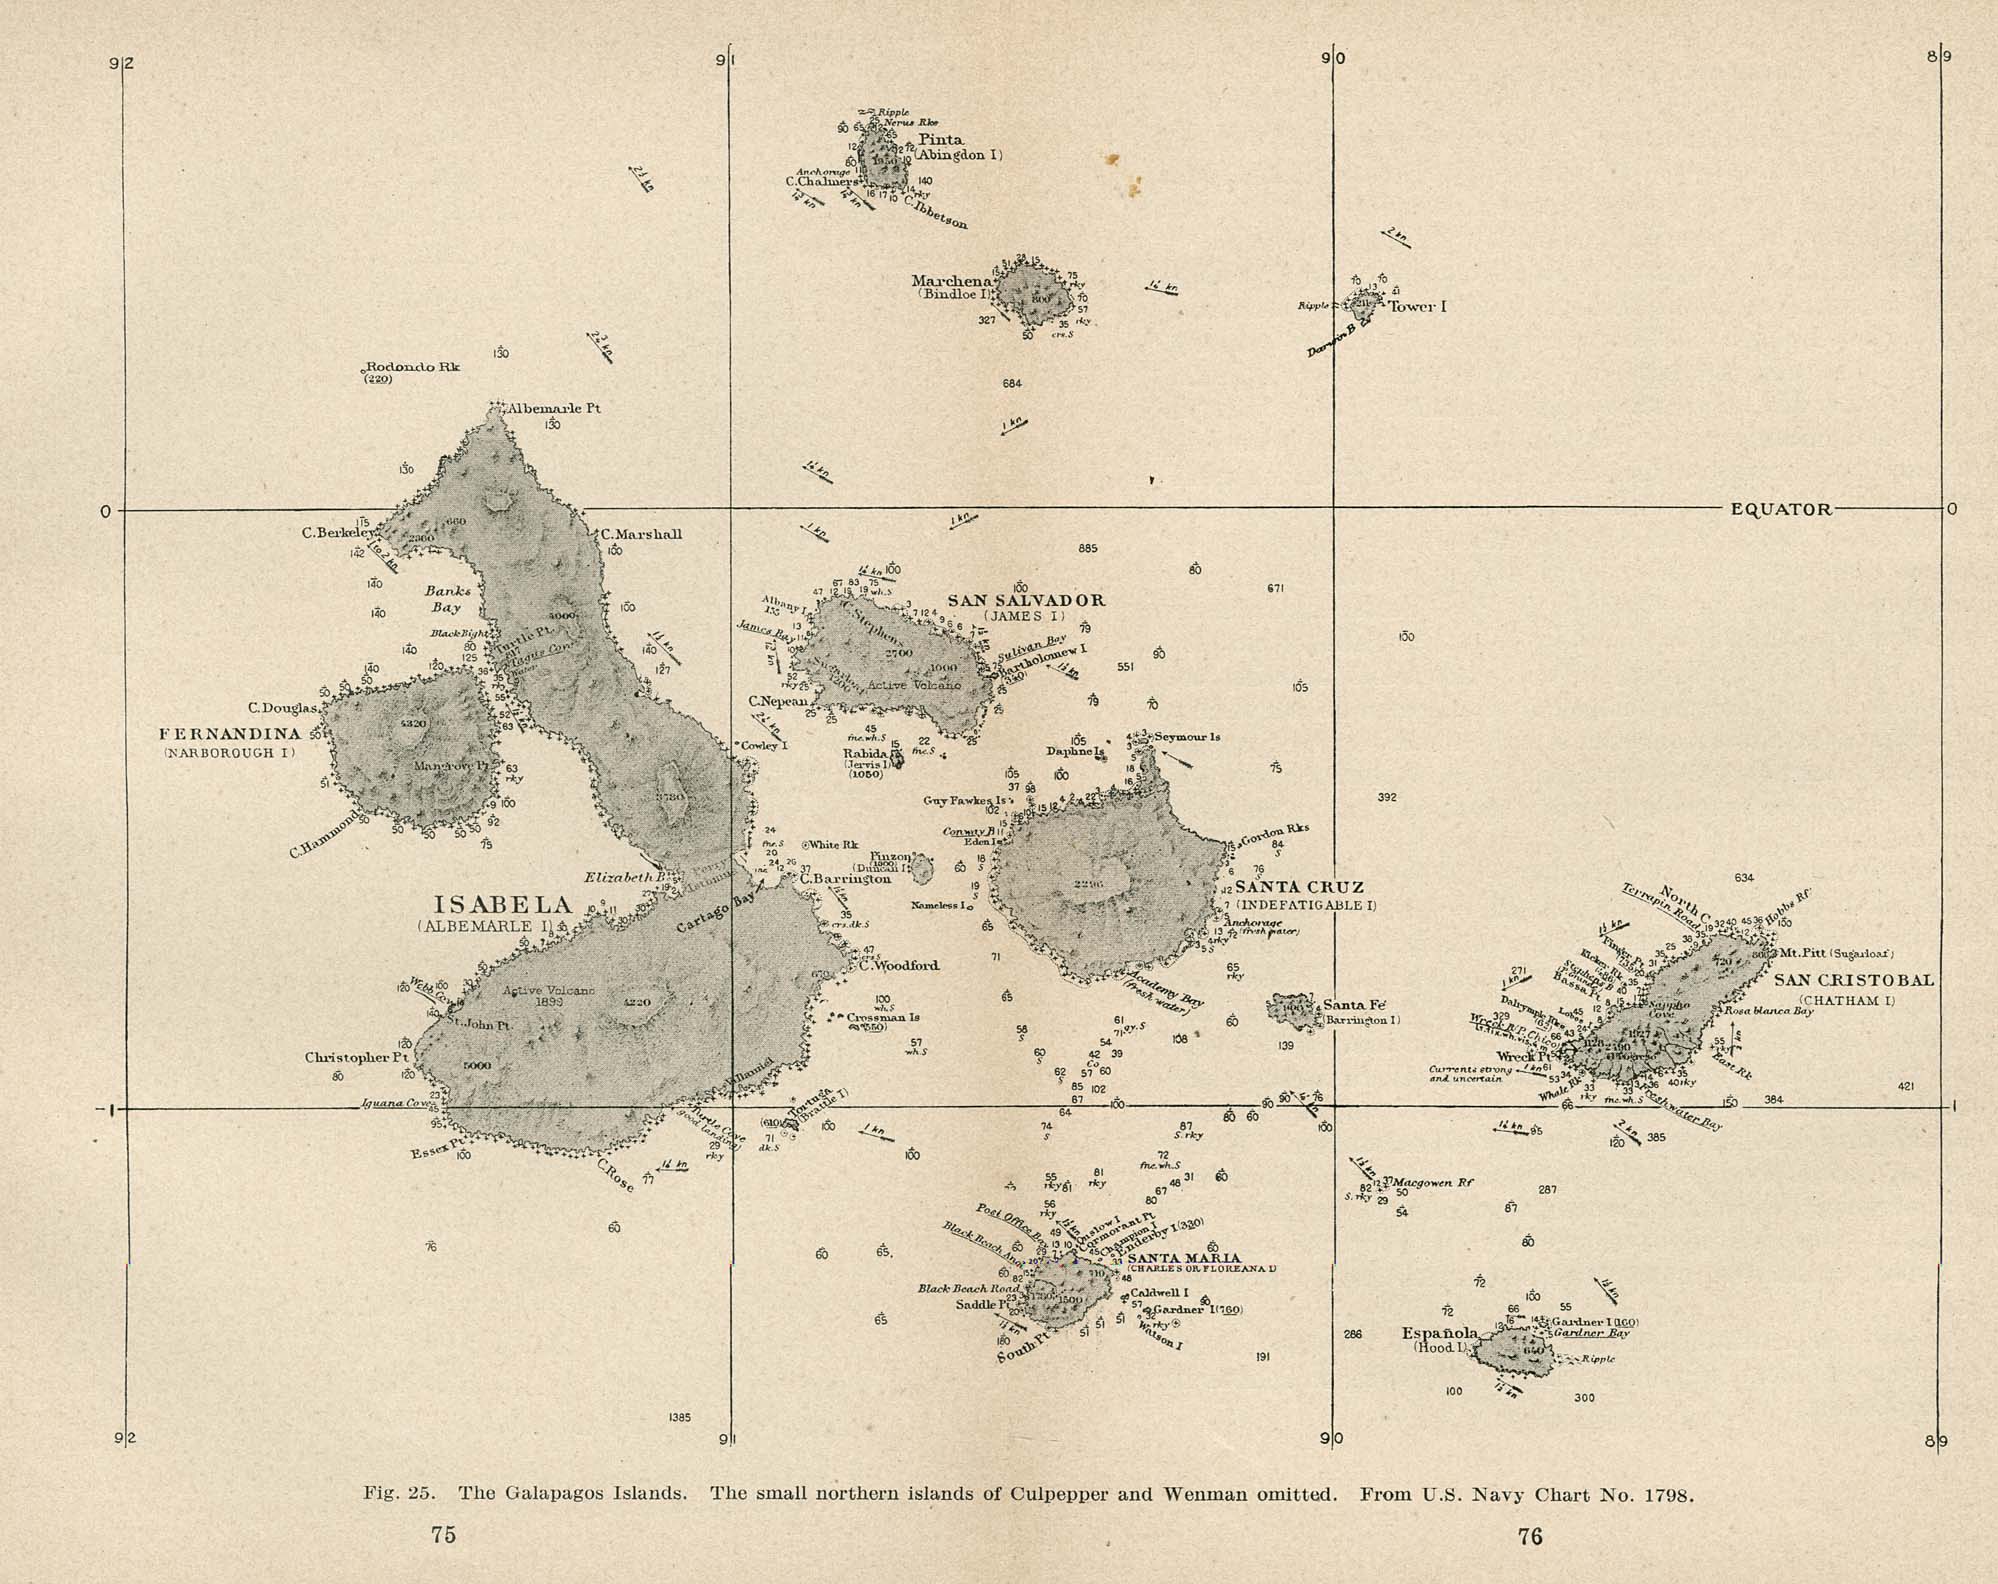 The Galapagos Islands. The small northern islands of Culpepper and Wenman omitted. From U.S. Navy Chart No. 1798.